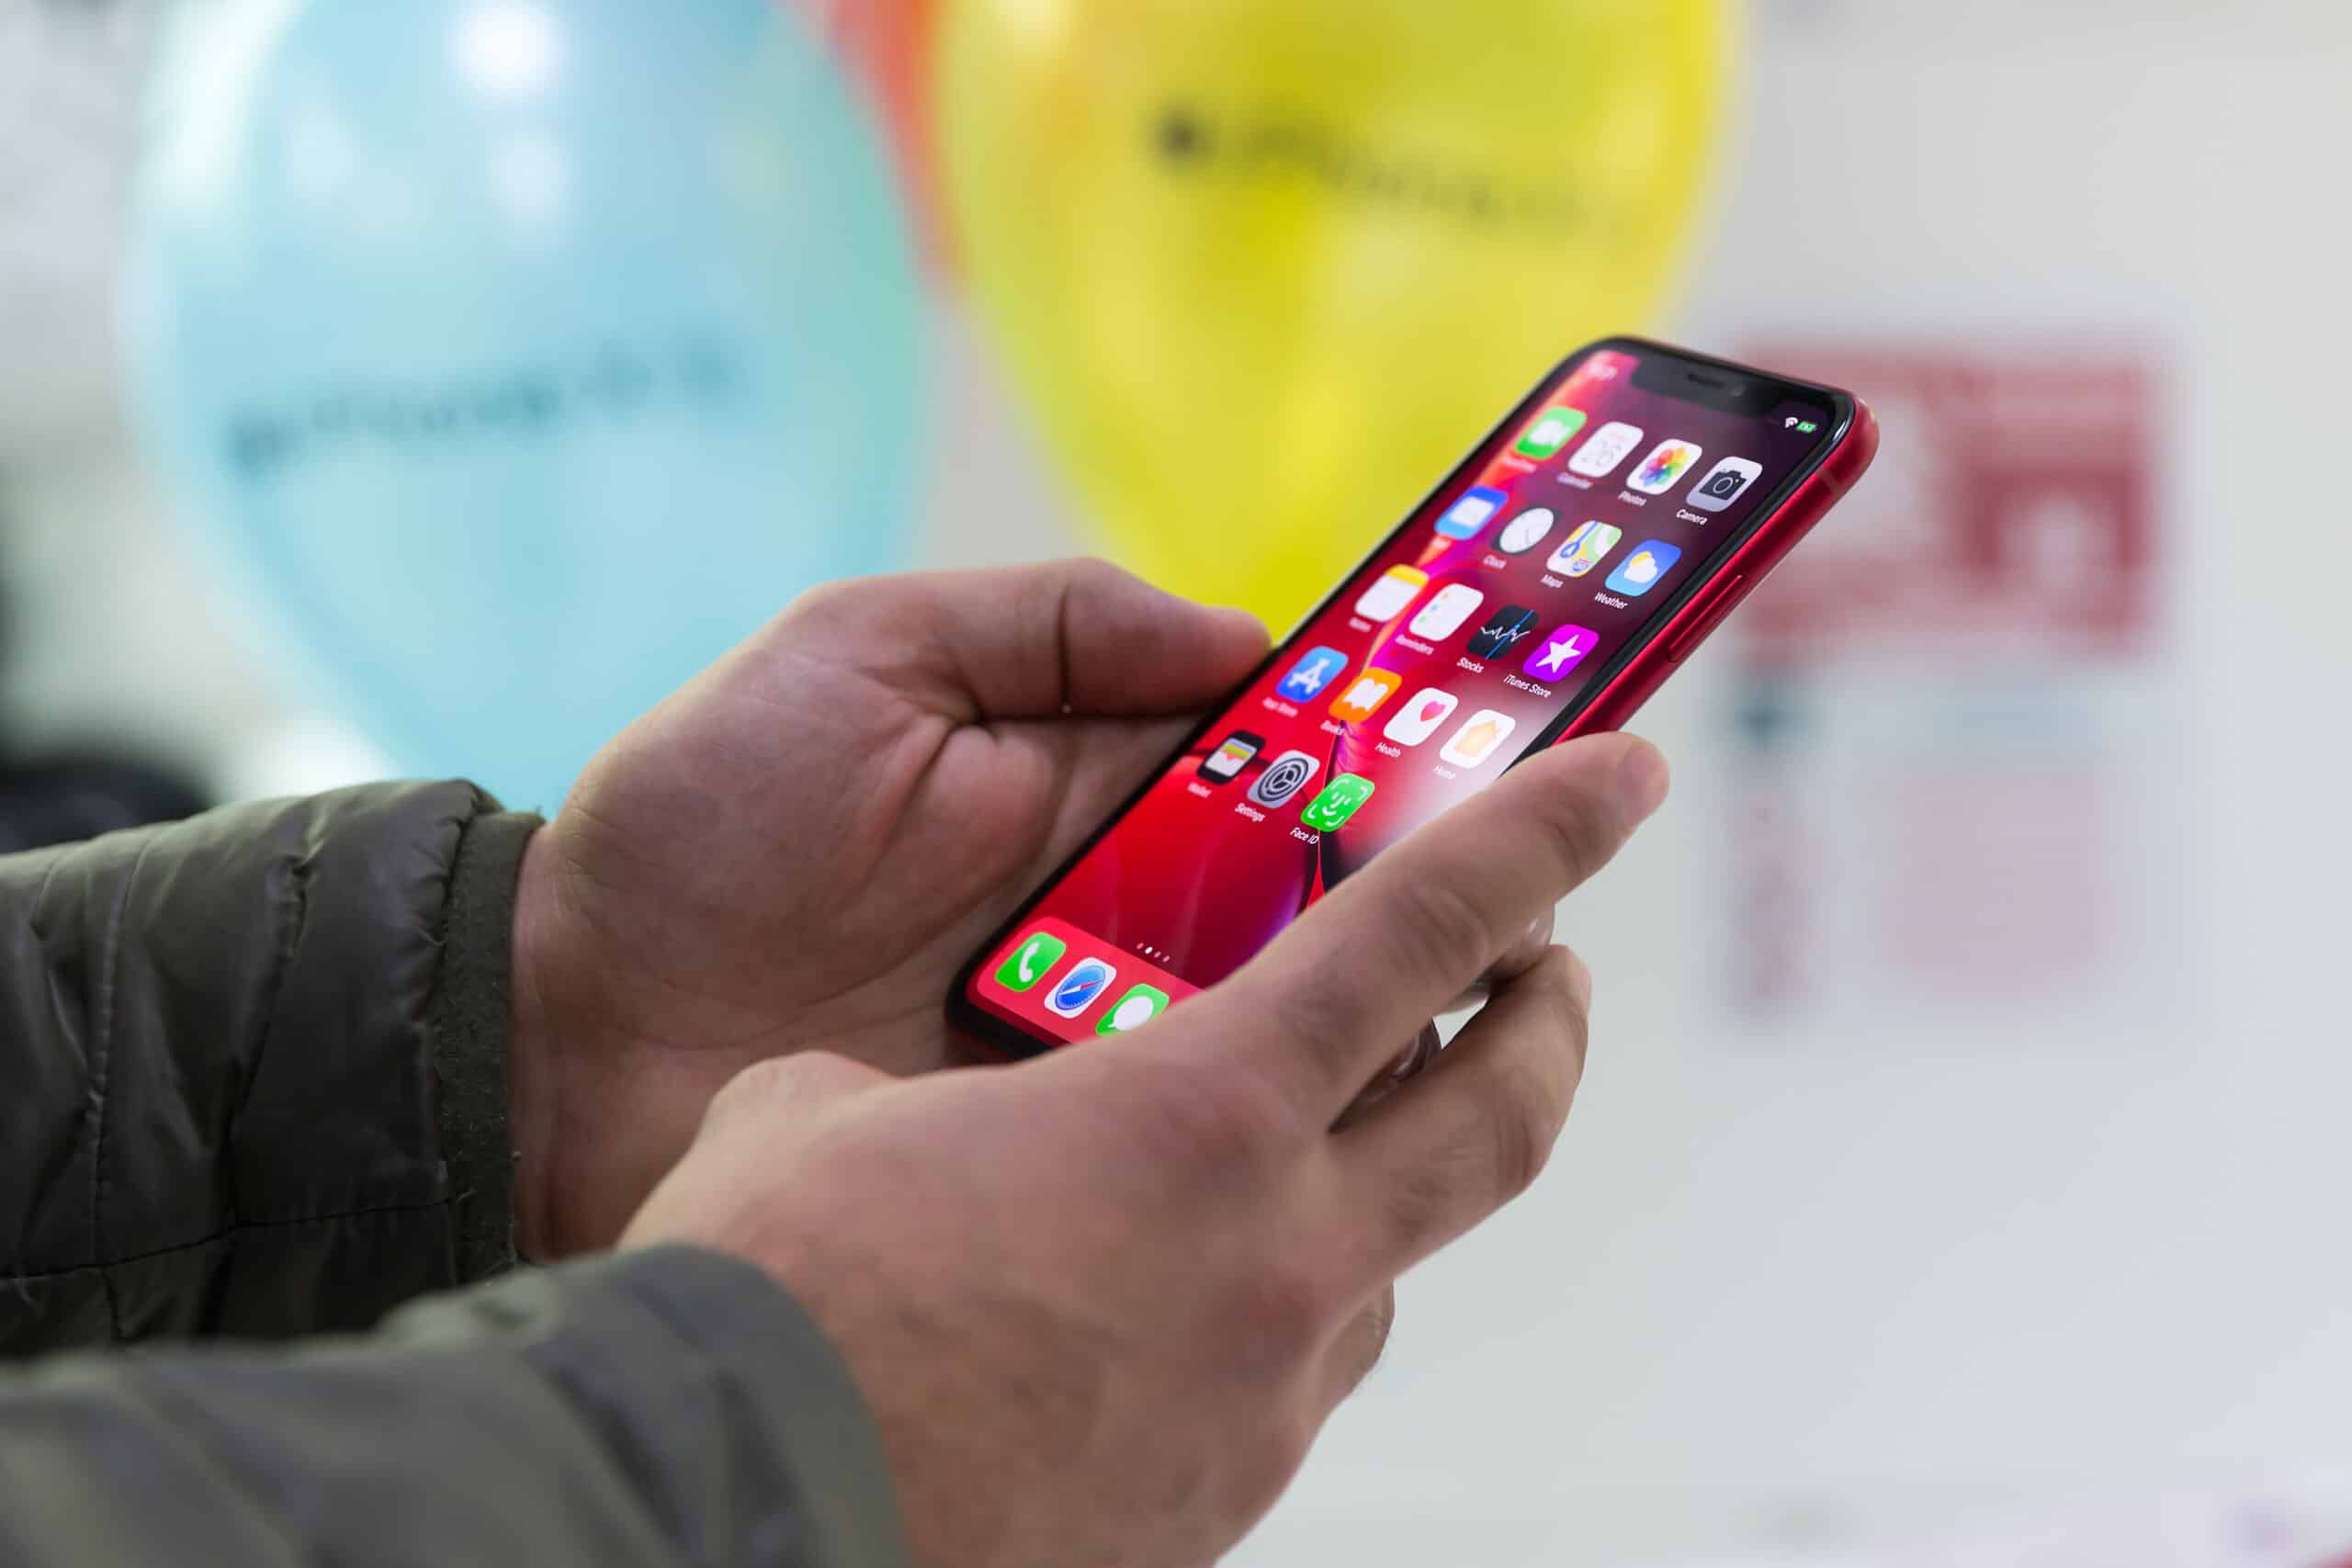 hands holding a red iPhone XR with the homescreen displayed.